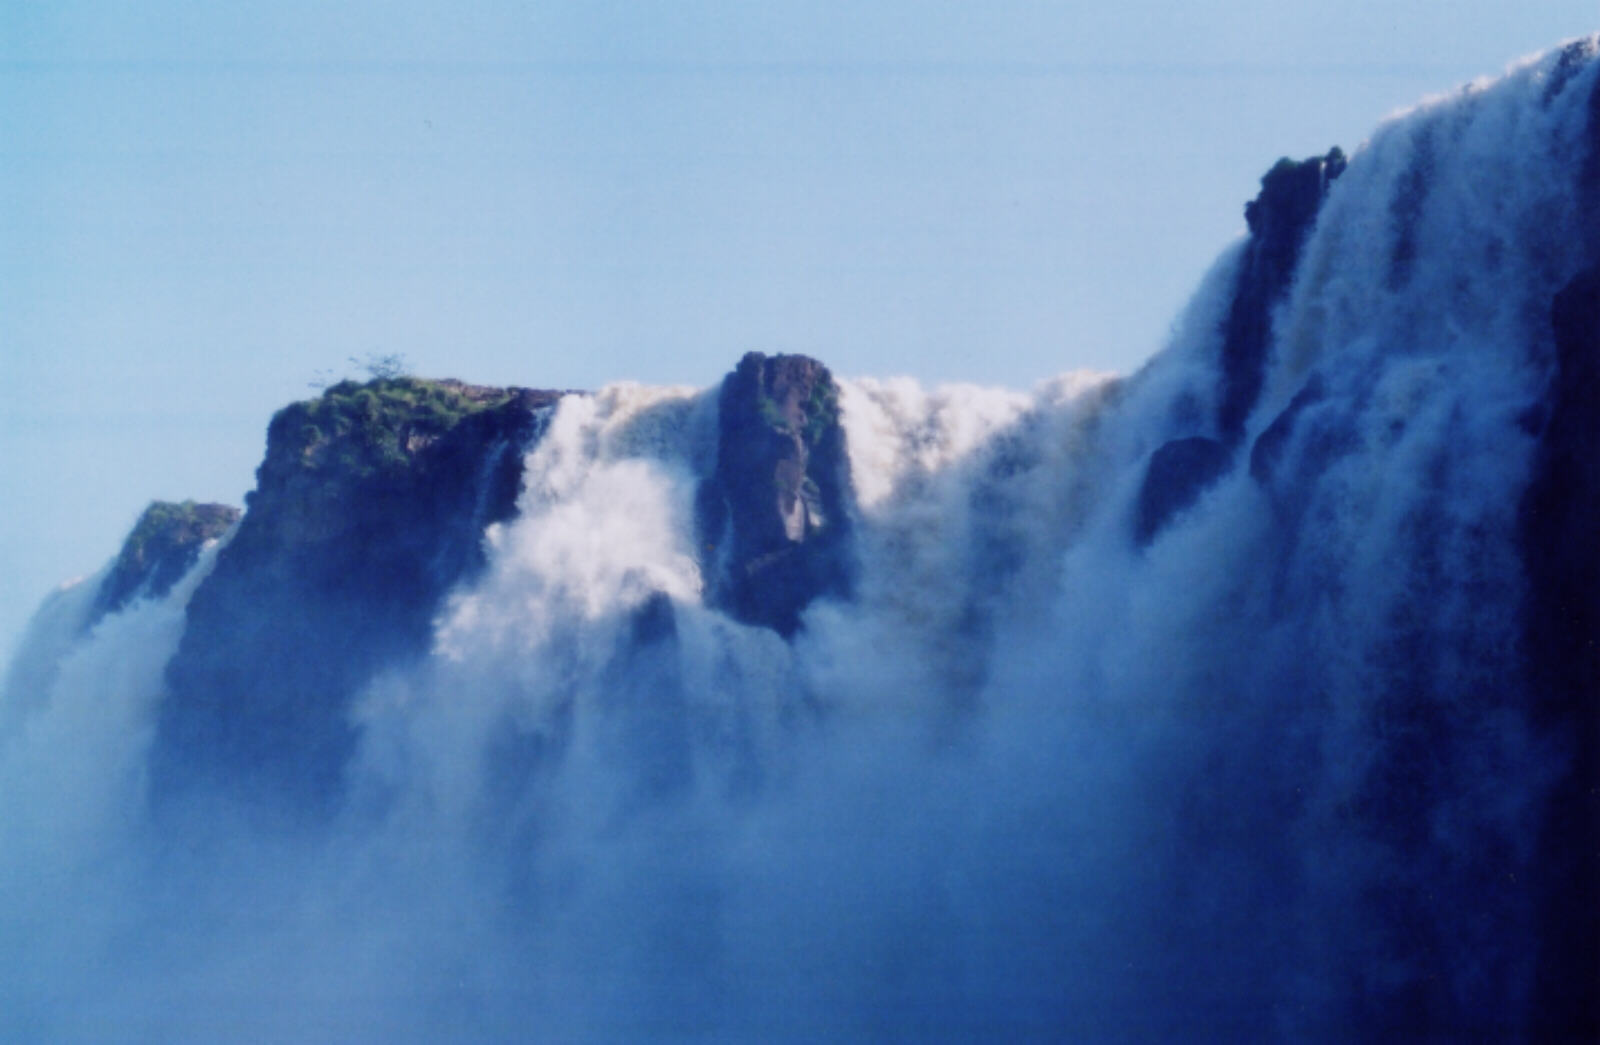 Iguazu Falls from a boat on the river, Brazil / Argentina